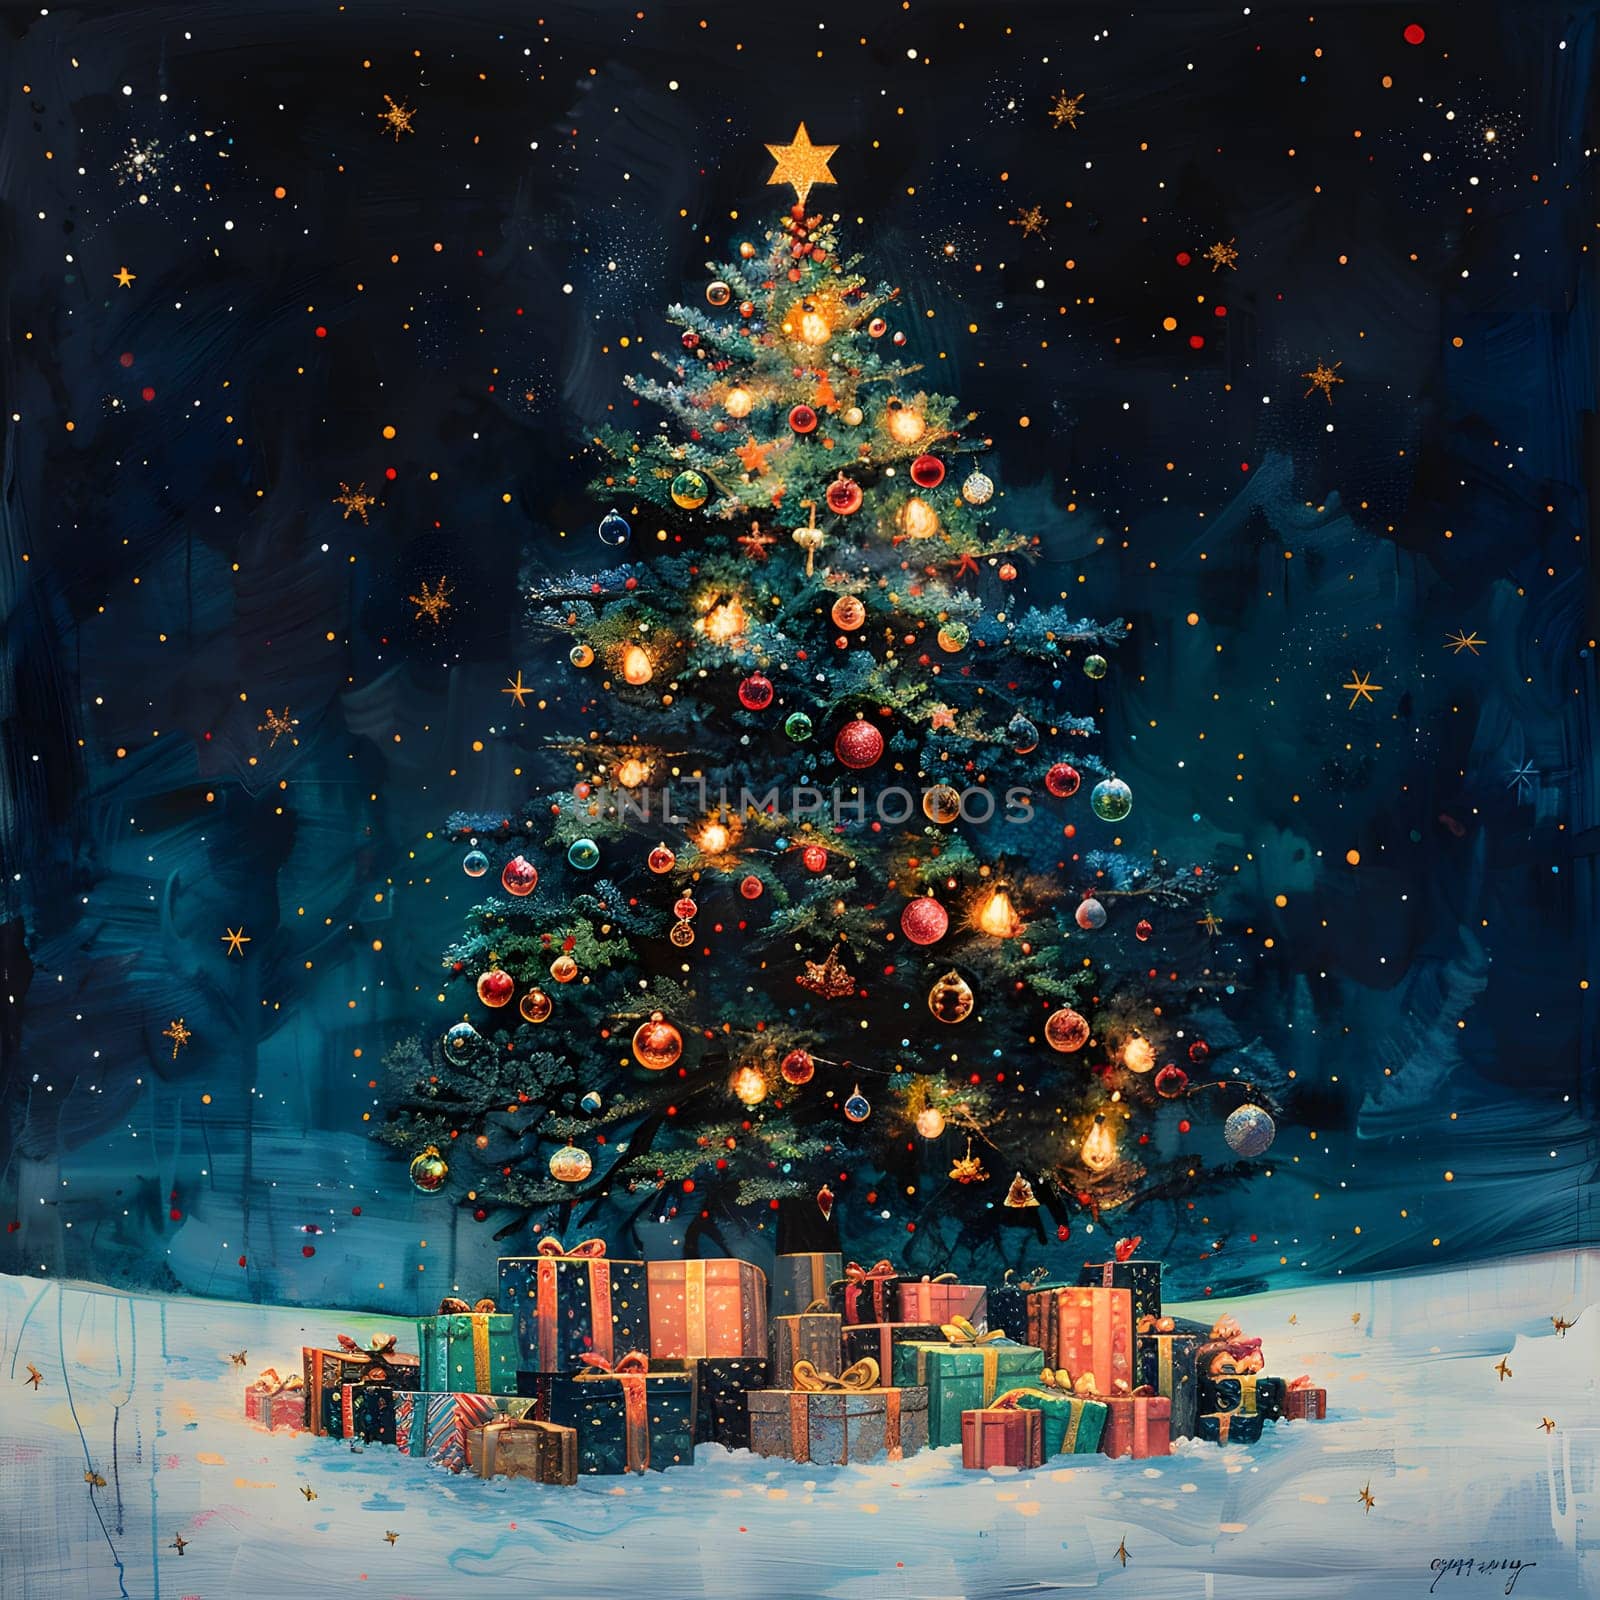 a painting of a christmas tree with gifts underneath it by Nadtochiy